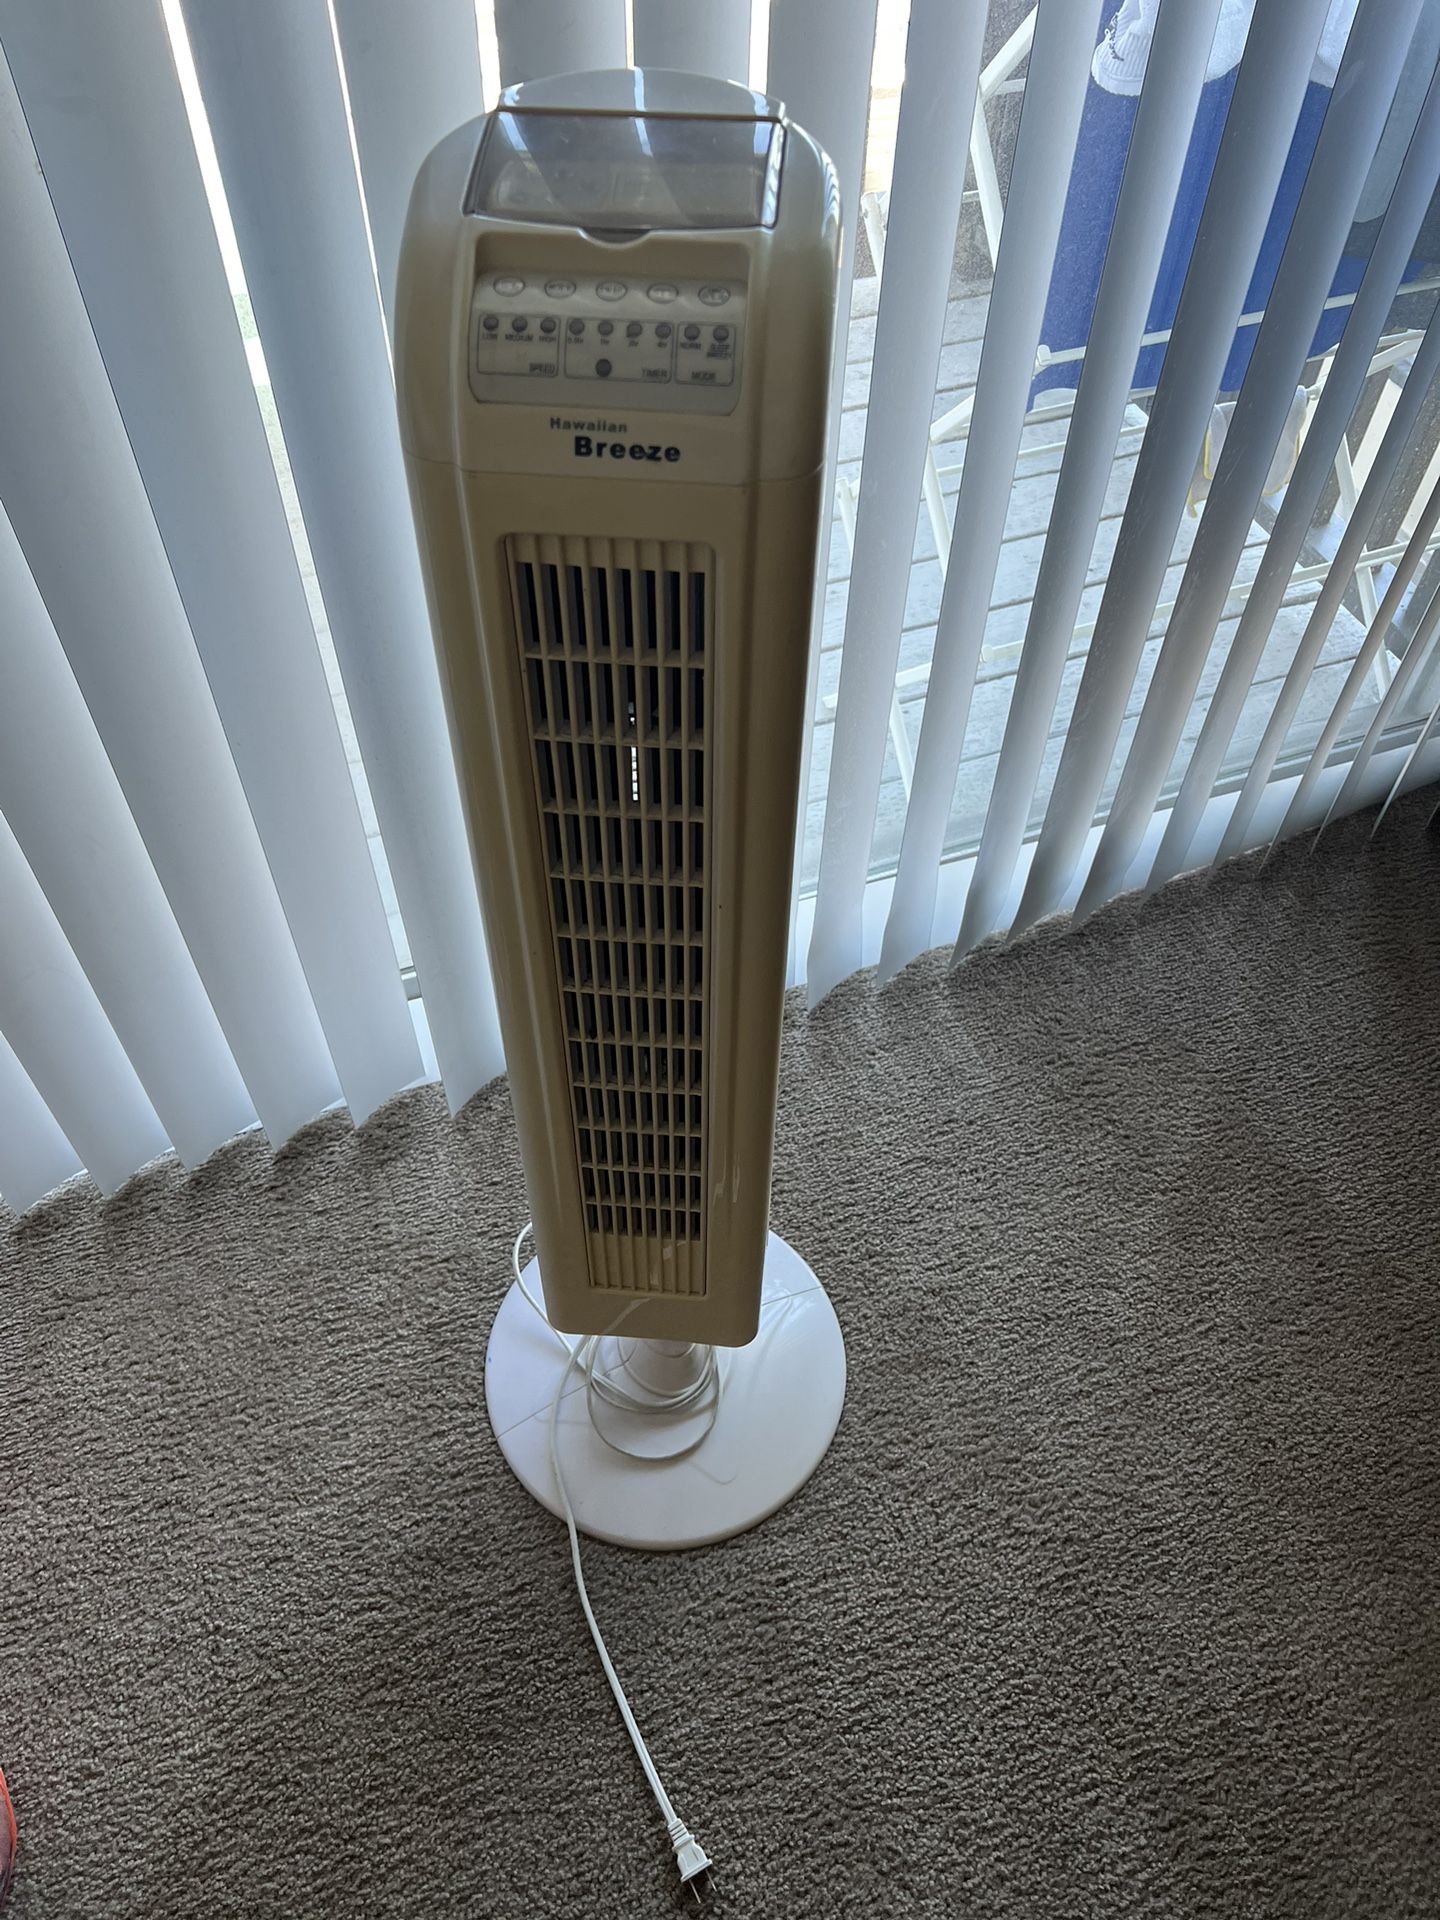 tower fan with remote control